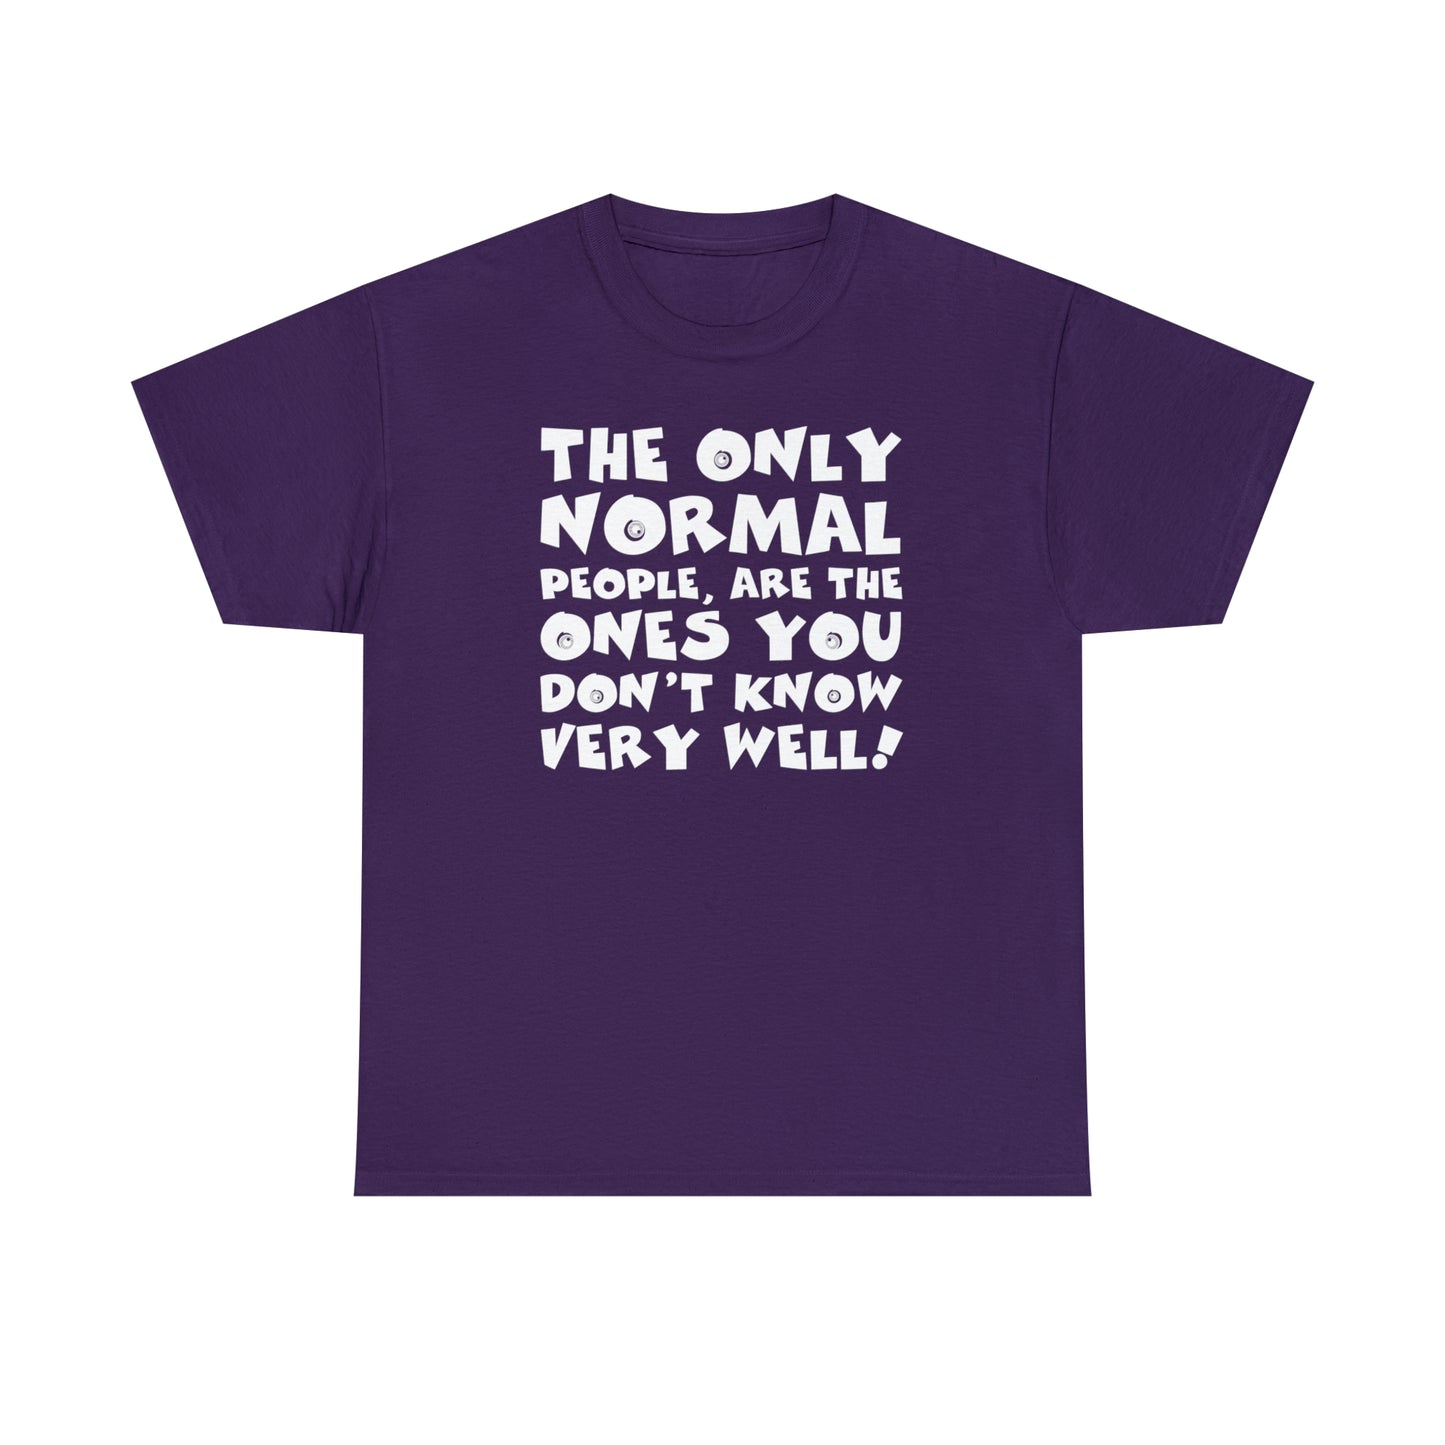 Normal People T-Shirt For Funny People TShirt Comedy T Shirt Silly Shirt For Funny Gift For Birthday